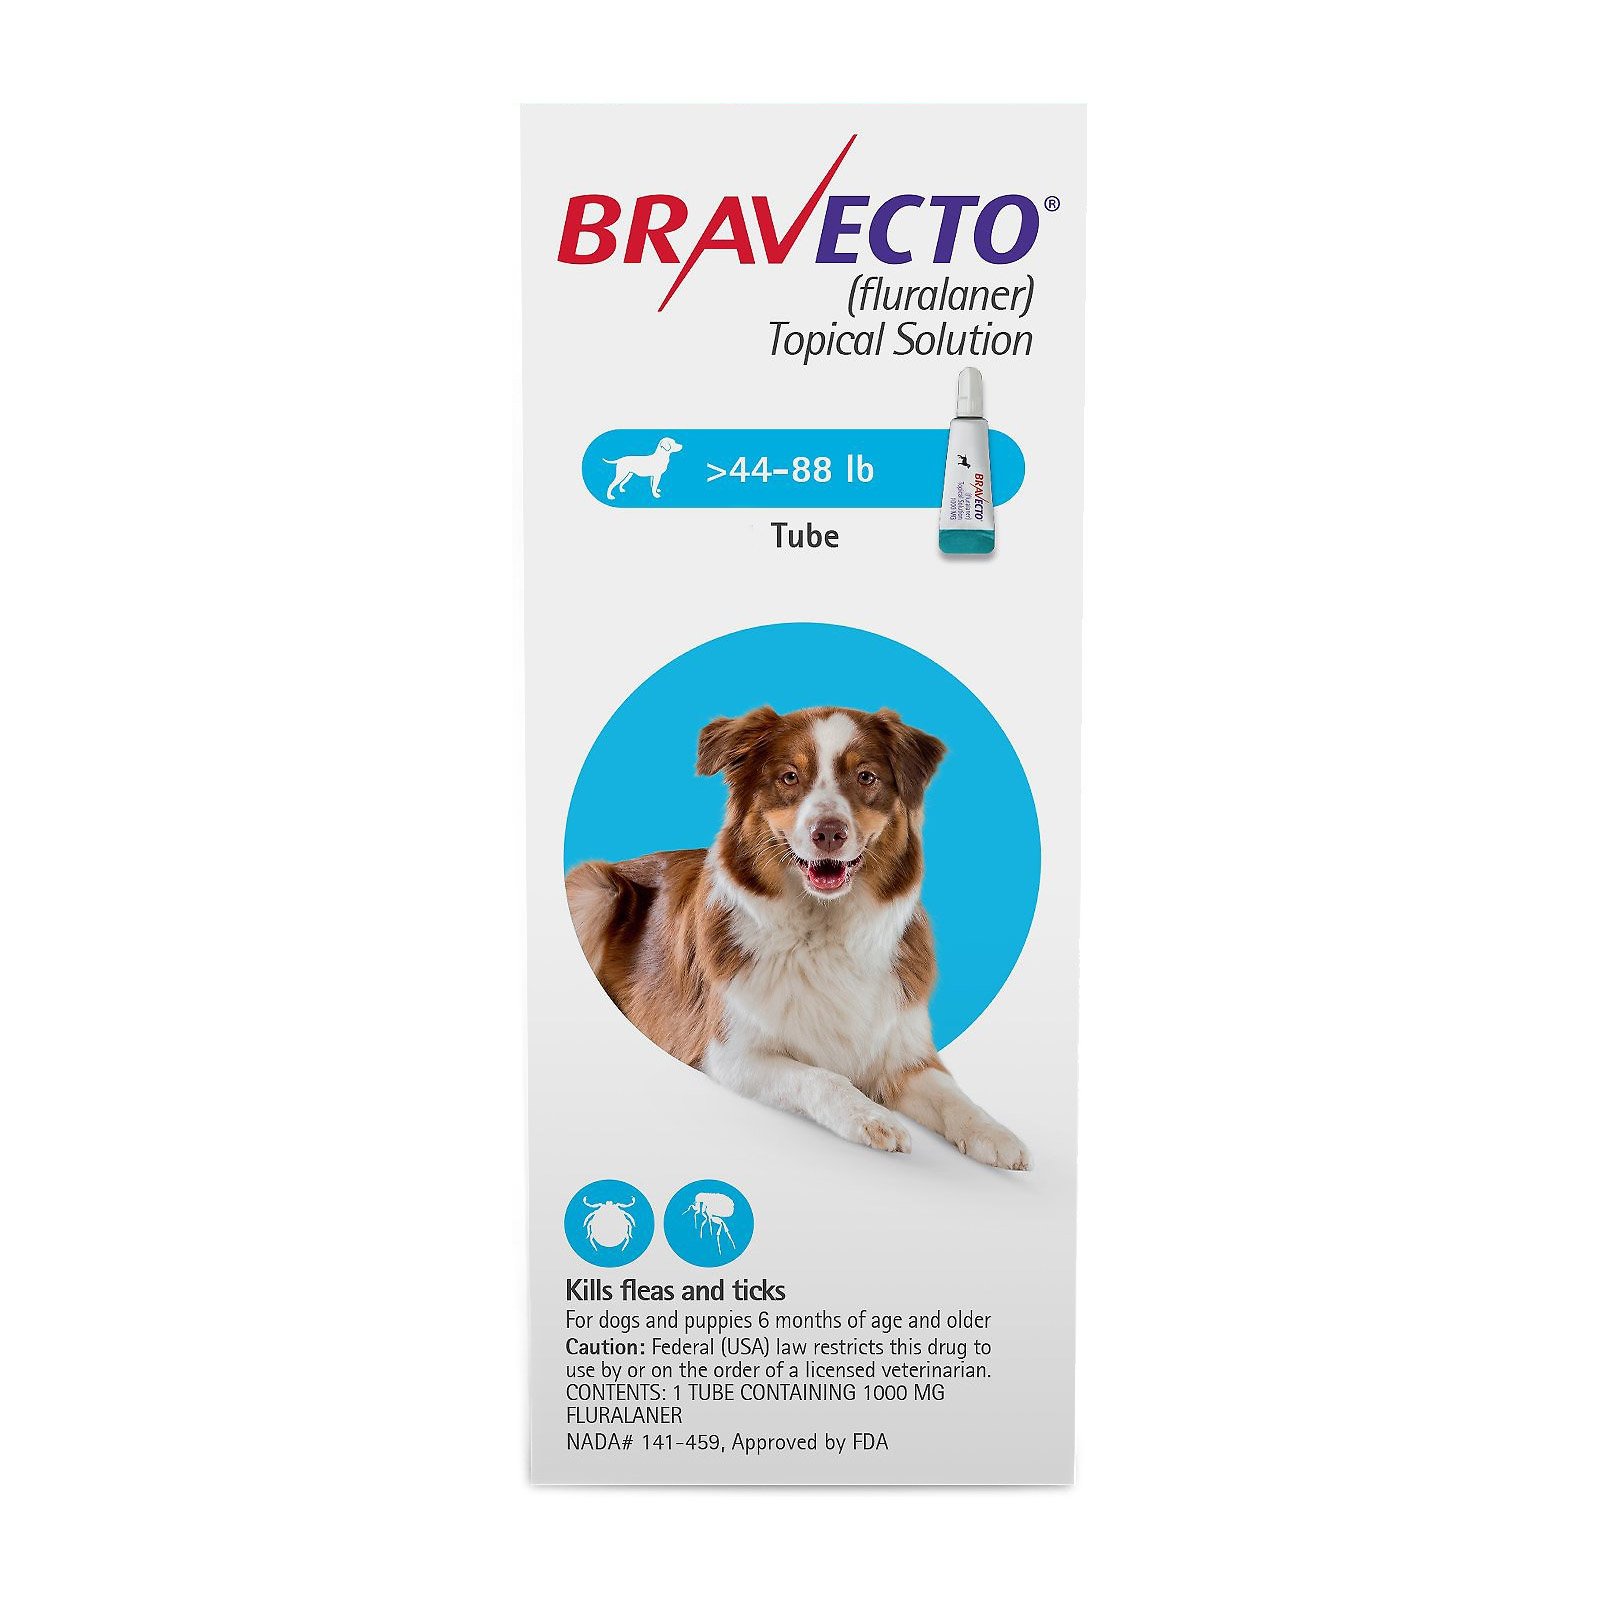 Bravecto-Topical-Solution-for-Dogs-44-88-lbs-2020.jpg